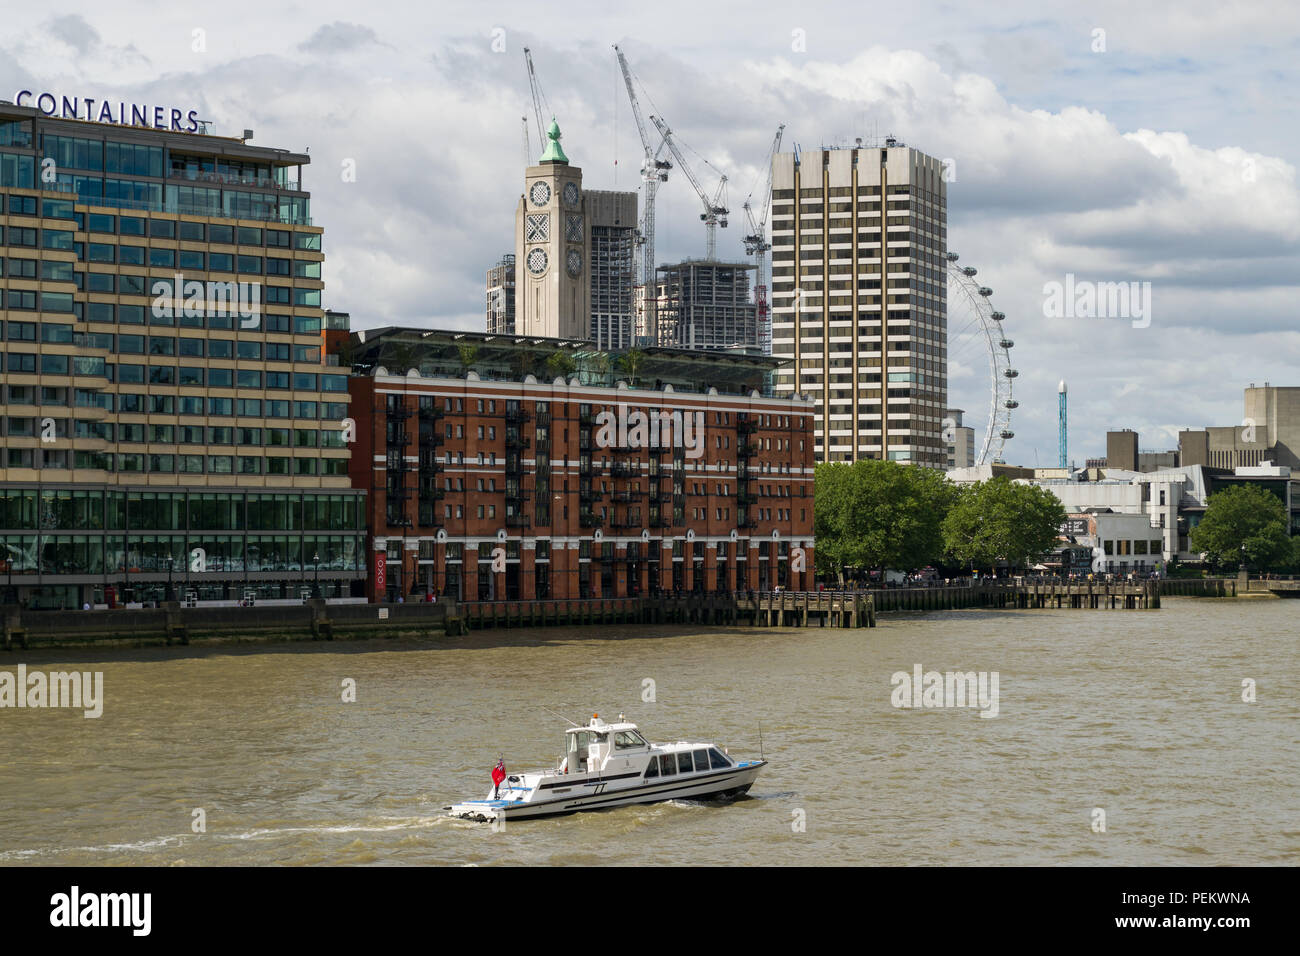 OXO tower wharf and adjacent buildings on a sunny Summer morning with boat on river Thames, London, UK Stock Photo